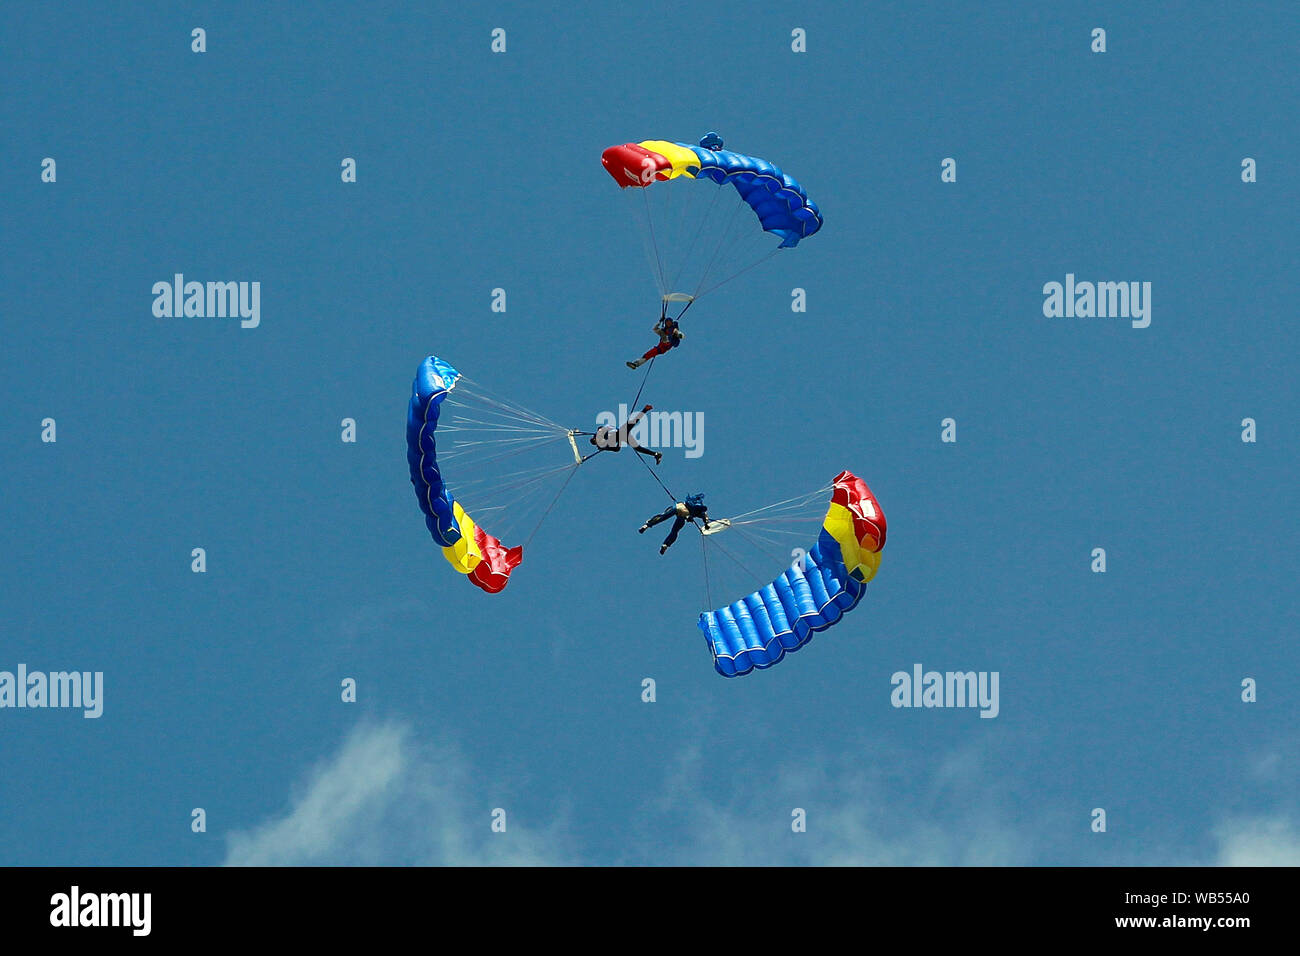 Bucharest, Romania. 24th Aug, 2019. Romanian paratroopers of the Blue Wings perform during the Bucharest International Air Show in Bucharest, Romania, on Aug. 24, 2019. Bucharest International Air Show and General Aviation Exhibition was held here on Saturday, bringing over 100 aircrafts to the public. Credit: Cristian Cristel/Xinhua Stock Photo